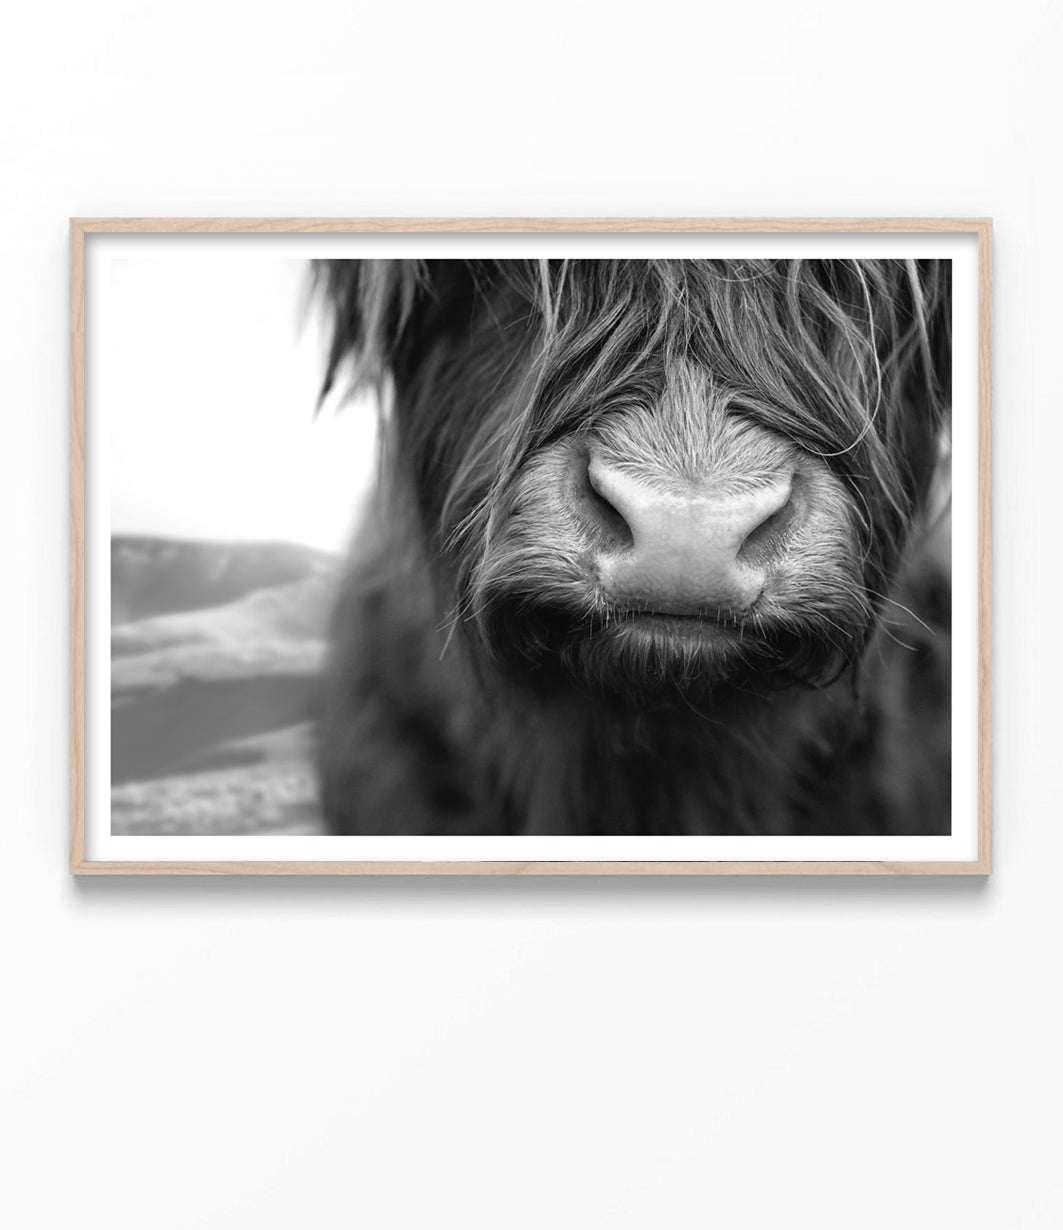 Shaggy Highland Cow Print (Black and White)